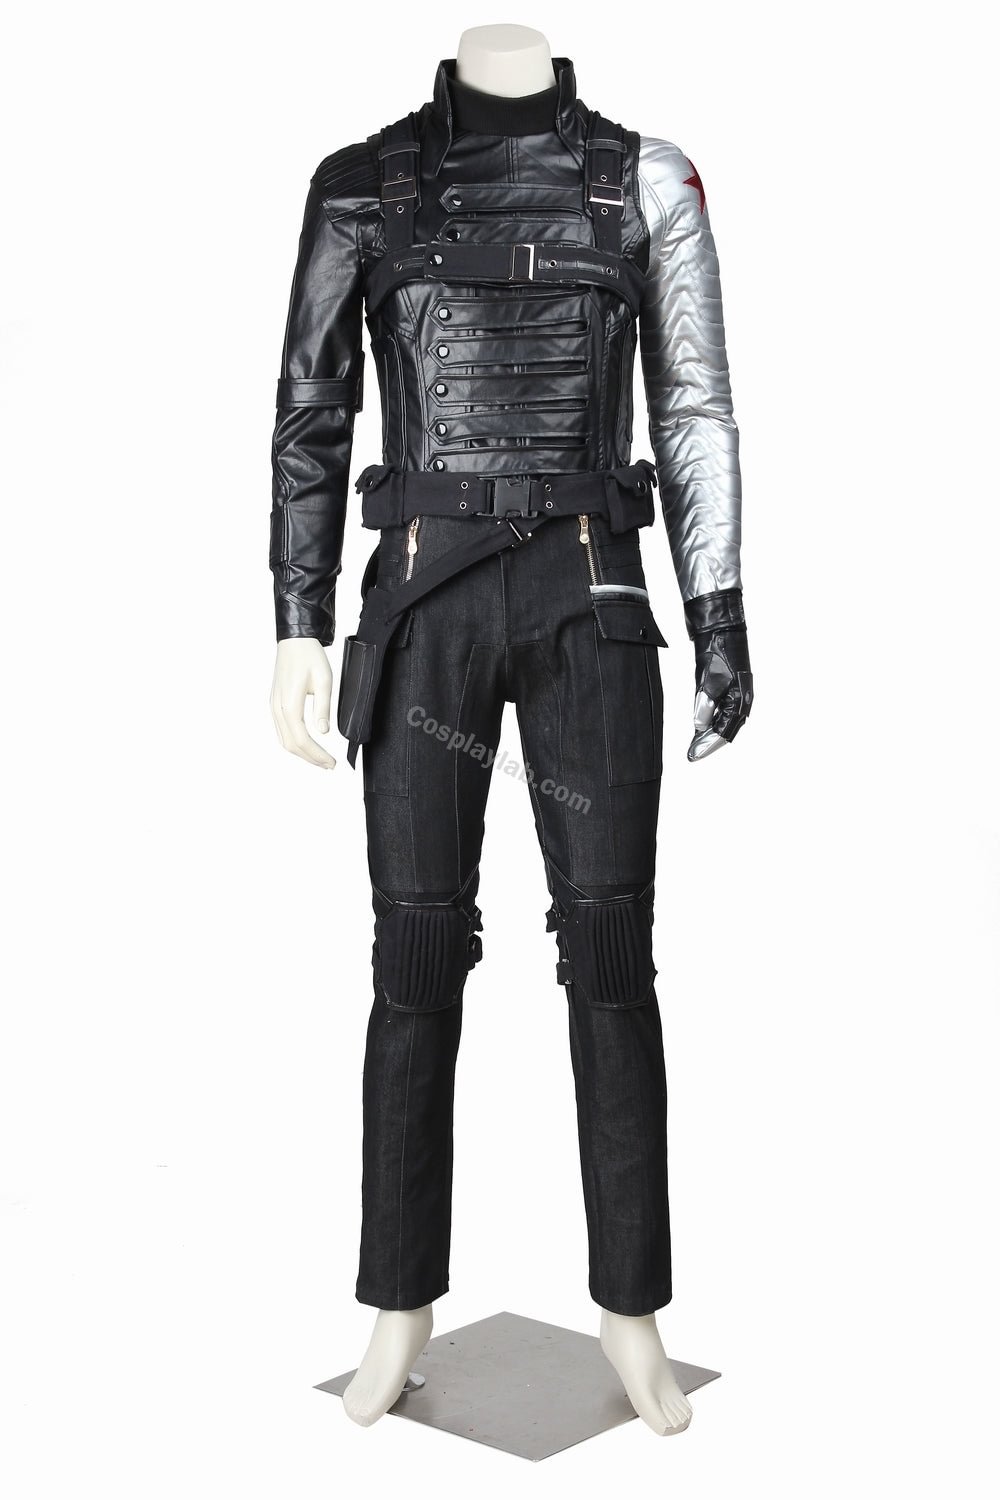 Winter Soldier Cosplay Costume Bucky Barnes Battle Suit outfit By CosplayLab